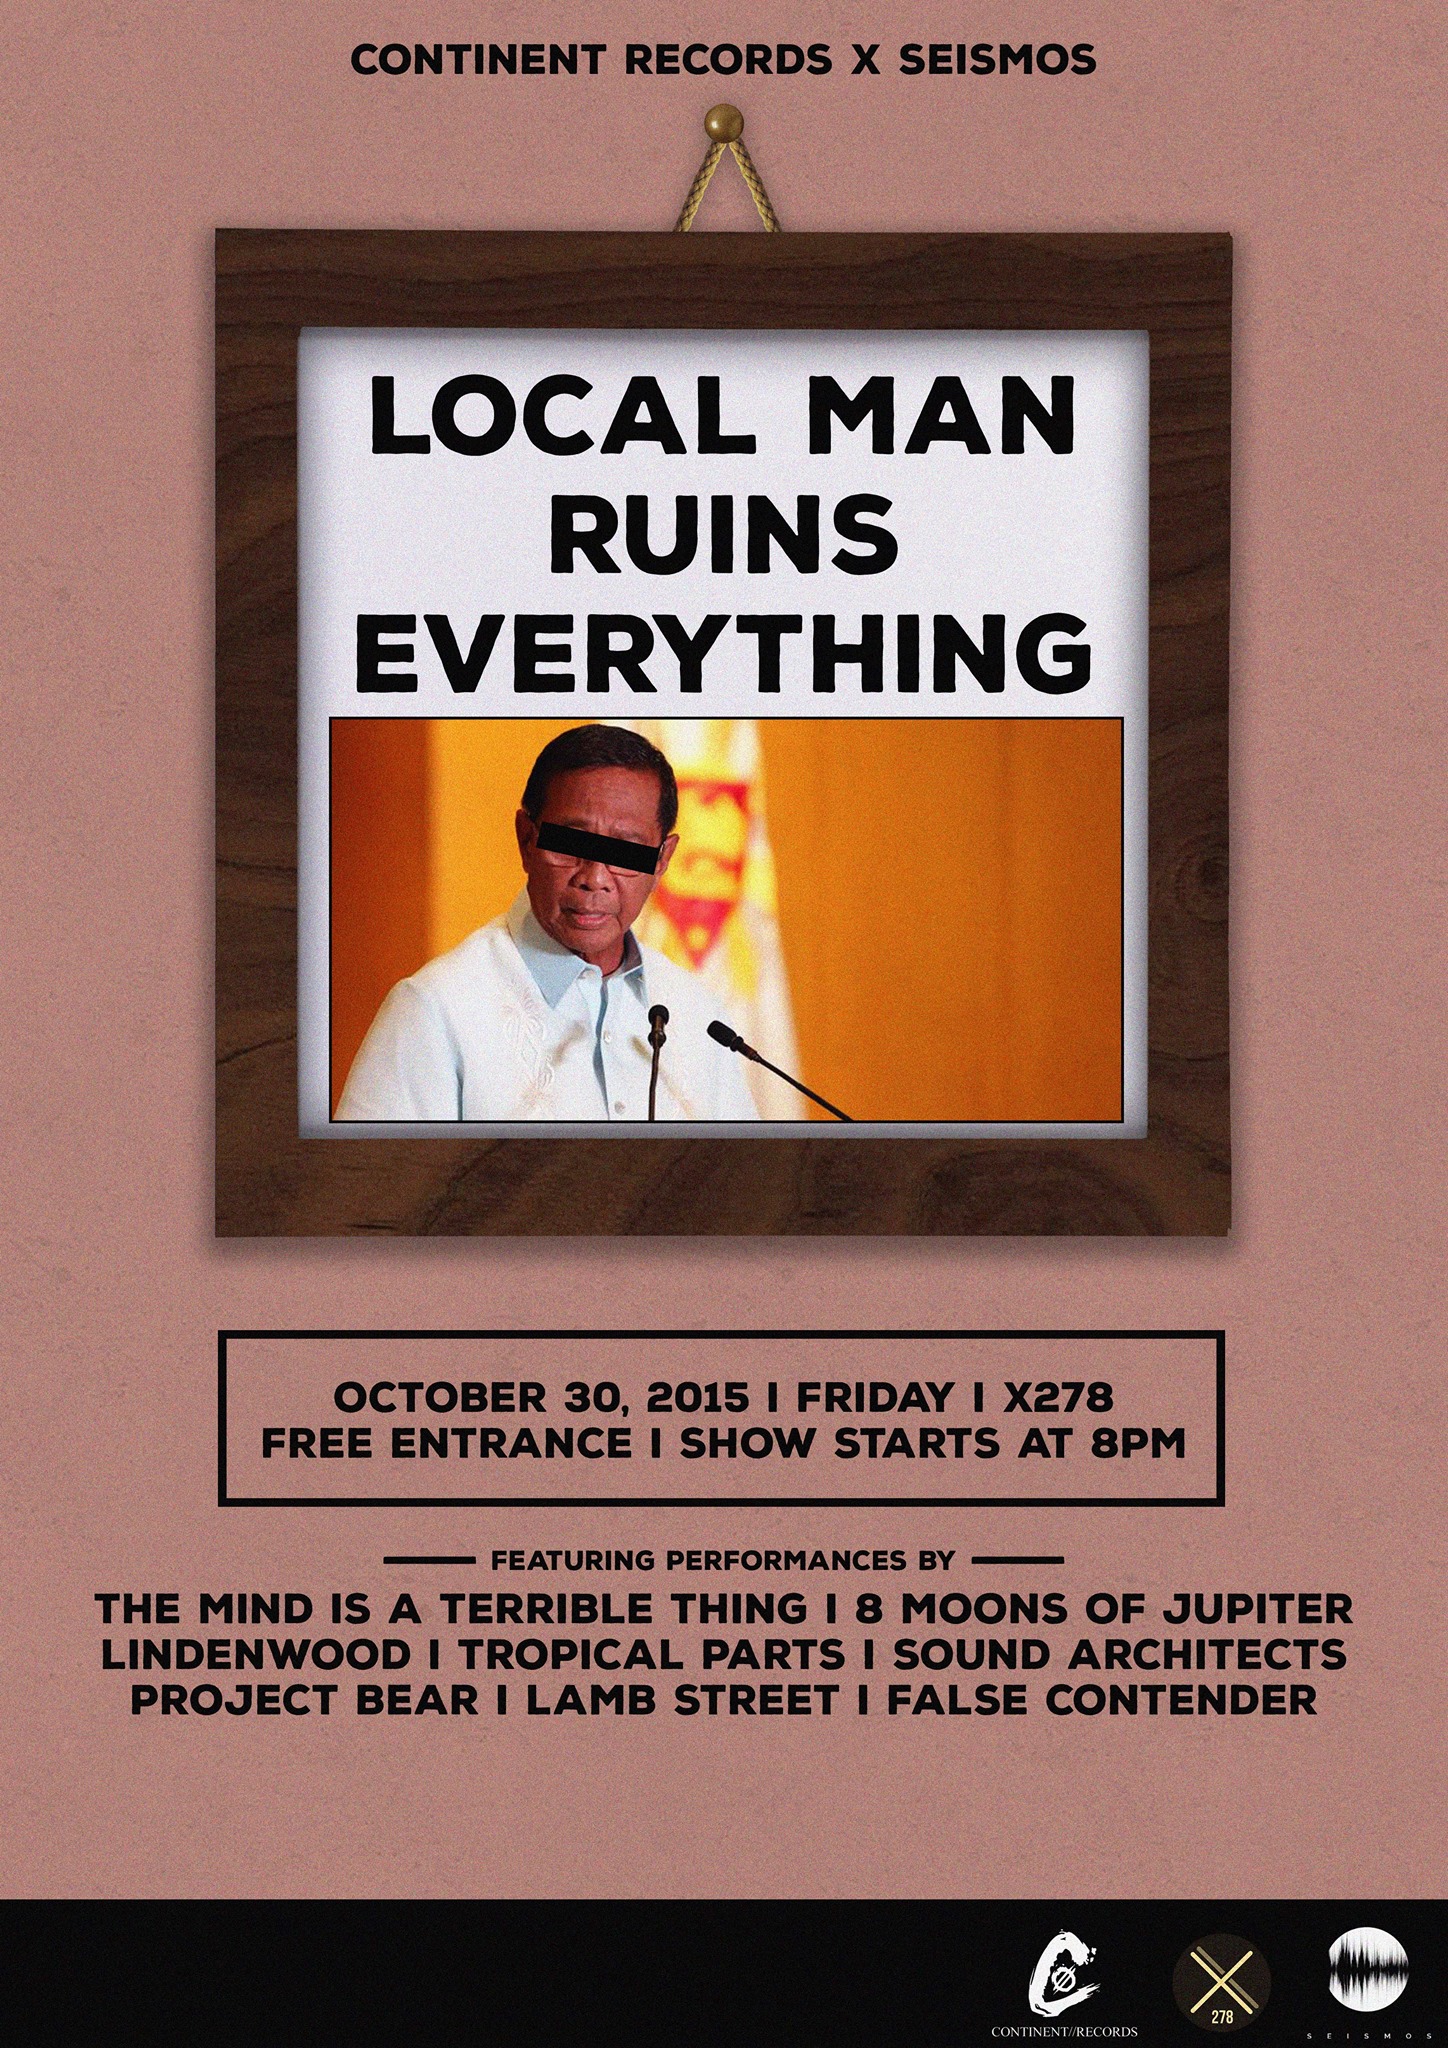 Local Man Ruins Everything     Friday, October 30     at 8:00pm     Next Week · 89°F / 74°F Partly Cloudy     	     Show Map     X278     278 A. Aguirre Ave., Phase 3, BF Homes,, 1709 Parañaque Continent Records x Seismos: Local Man Ruins Everything Live at X278 (formerly Apache) 278 Aguirre Ave., BF Homes, Paranaque City FREE ENTRANCE! Show starts 8pm Featuring: The Mind Is A Terrible Thing 8 Moons of Jupiter Lindenwood Tropical Parts Sound Architects Project Bear Lamb St. False Contender Poster by Bren Pasamba